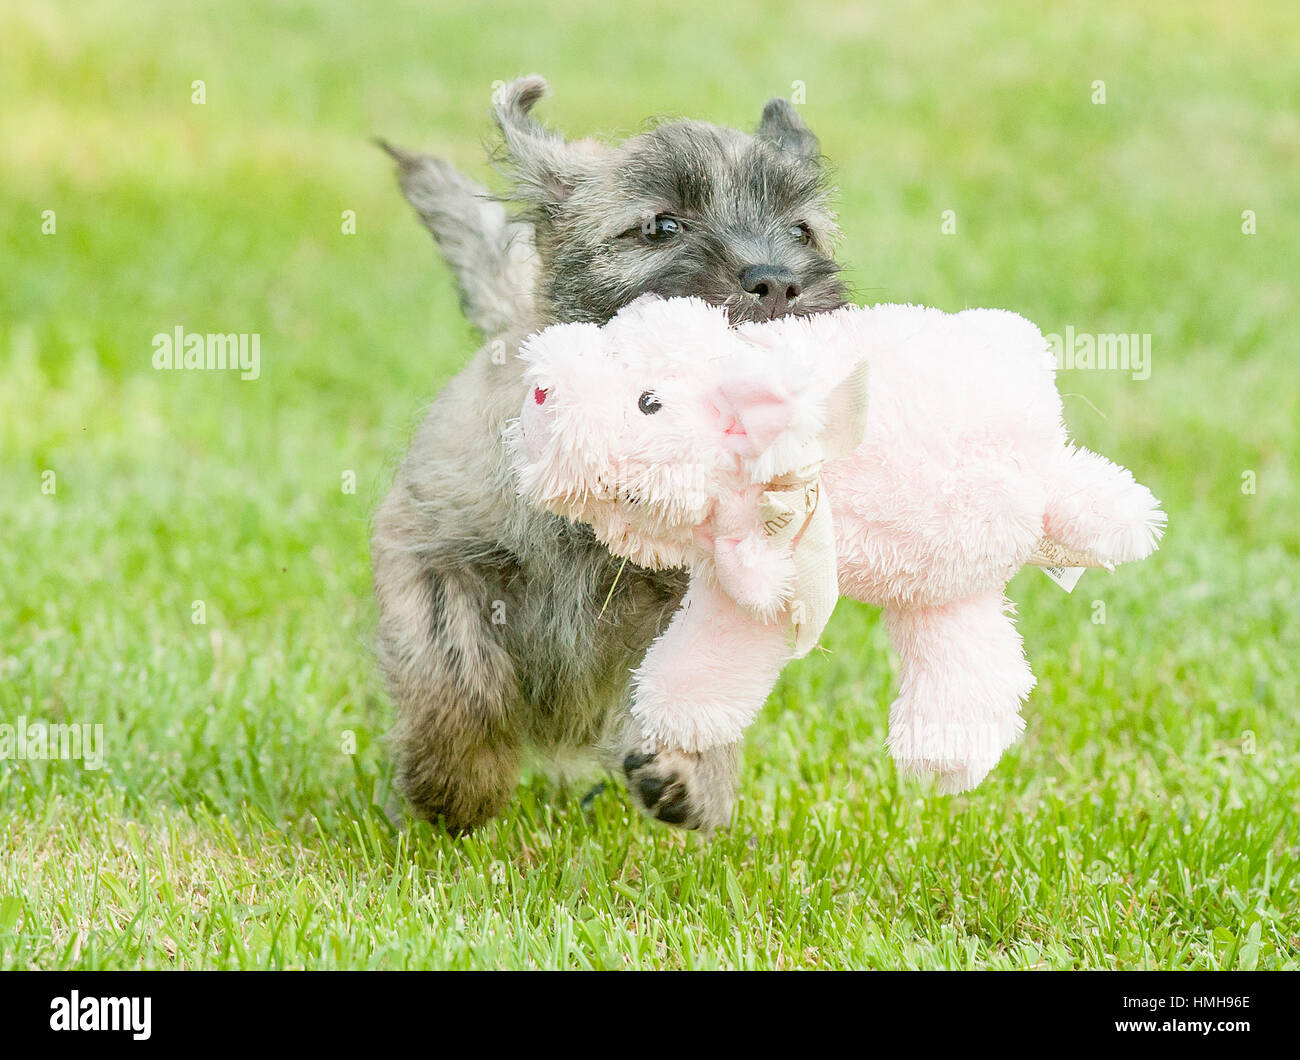 Beautiful Cairn Terrier puppy dog playing with big stuffed animal in his mouth outside in the green grass Stock Photo